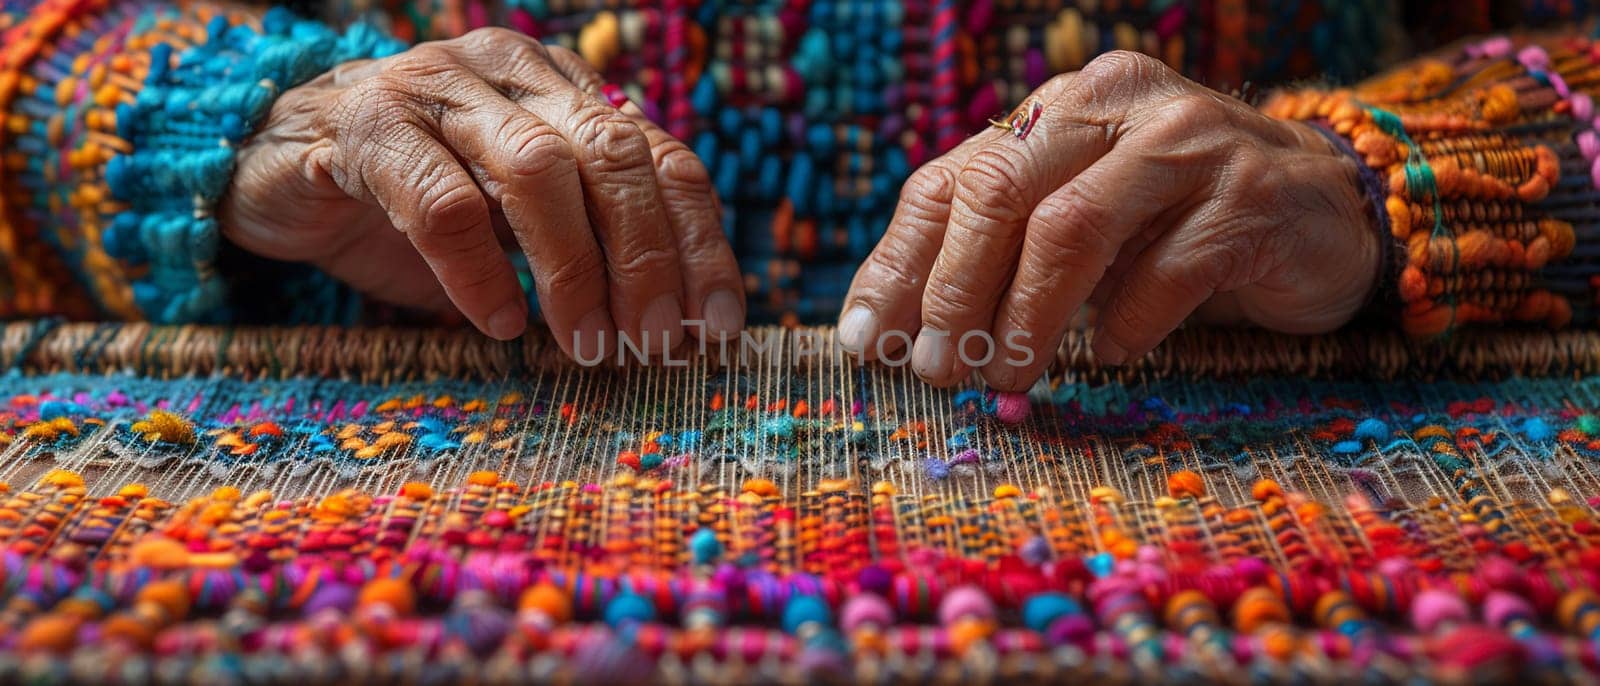 Hands weaving an enchanting tapestry, illustrated with patterns that come alive in a dance of colors.